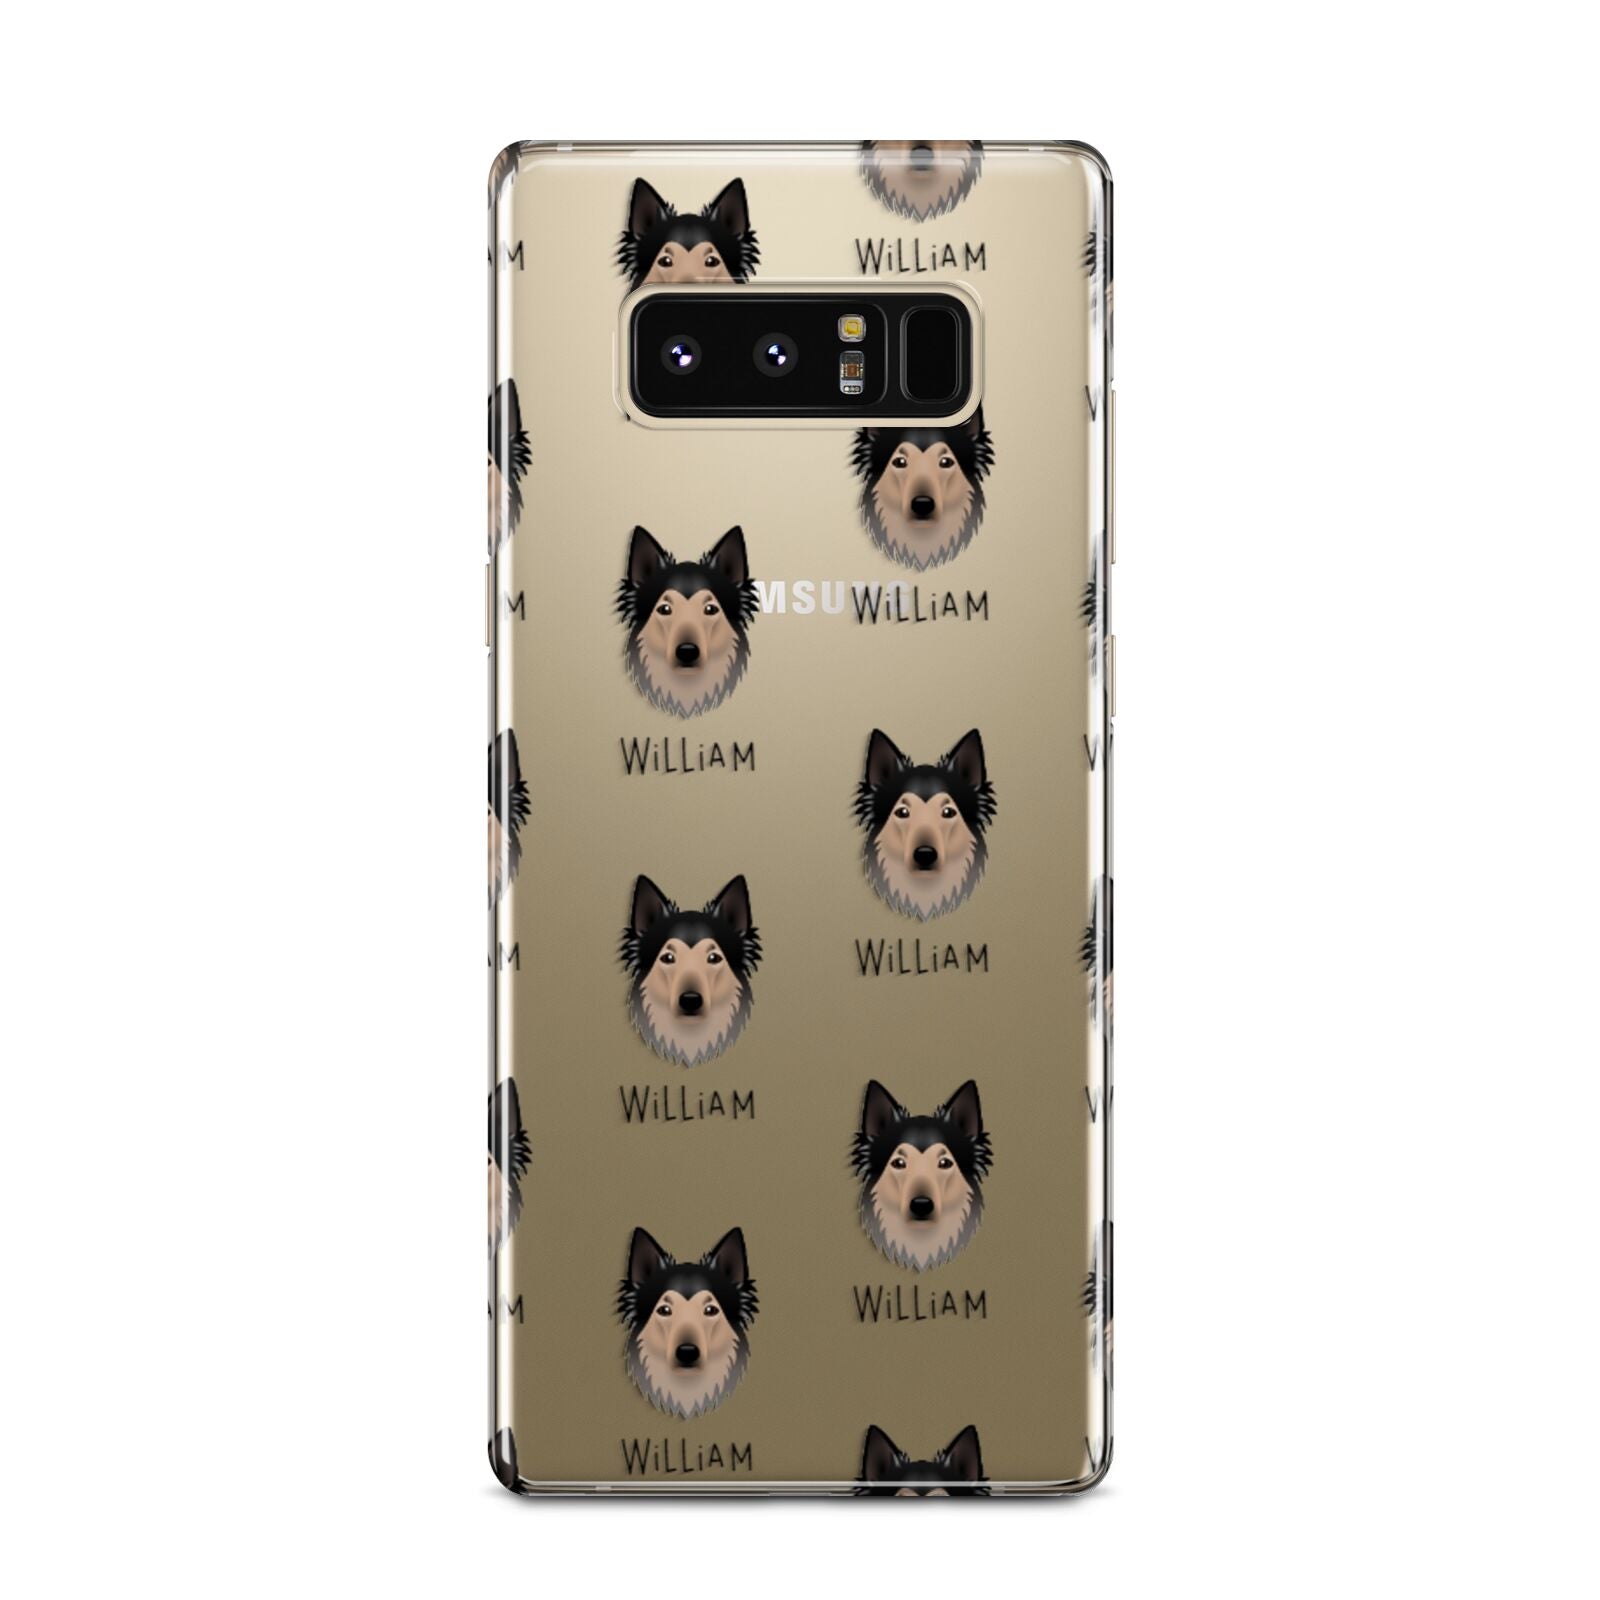 Shollie Icon with Name Samsung Galaxy Note 8 Case